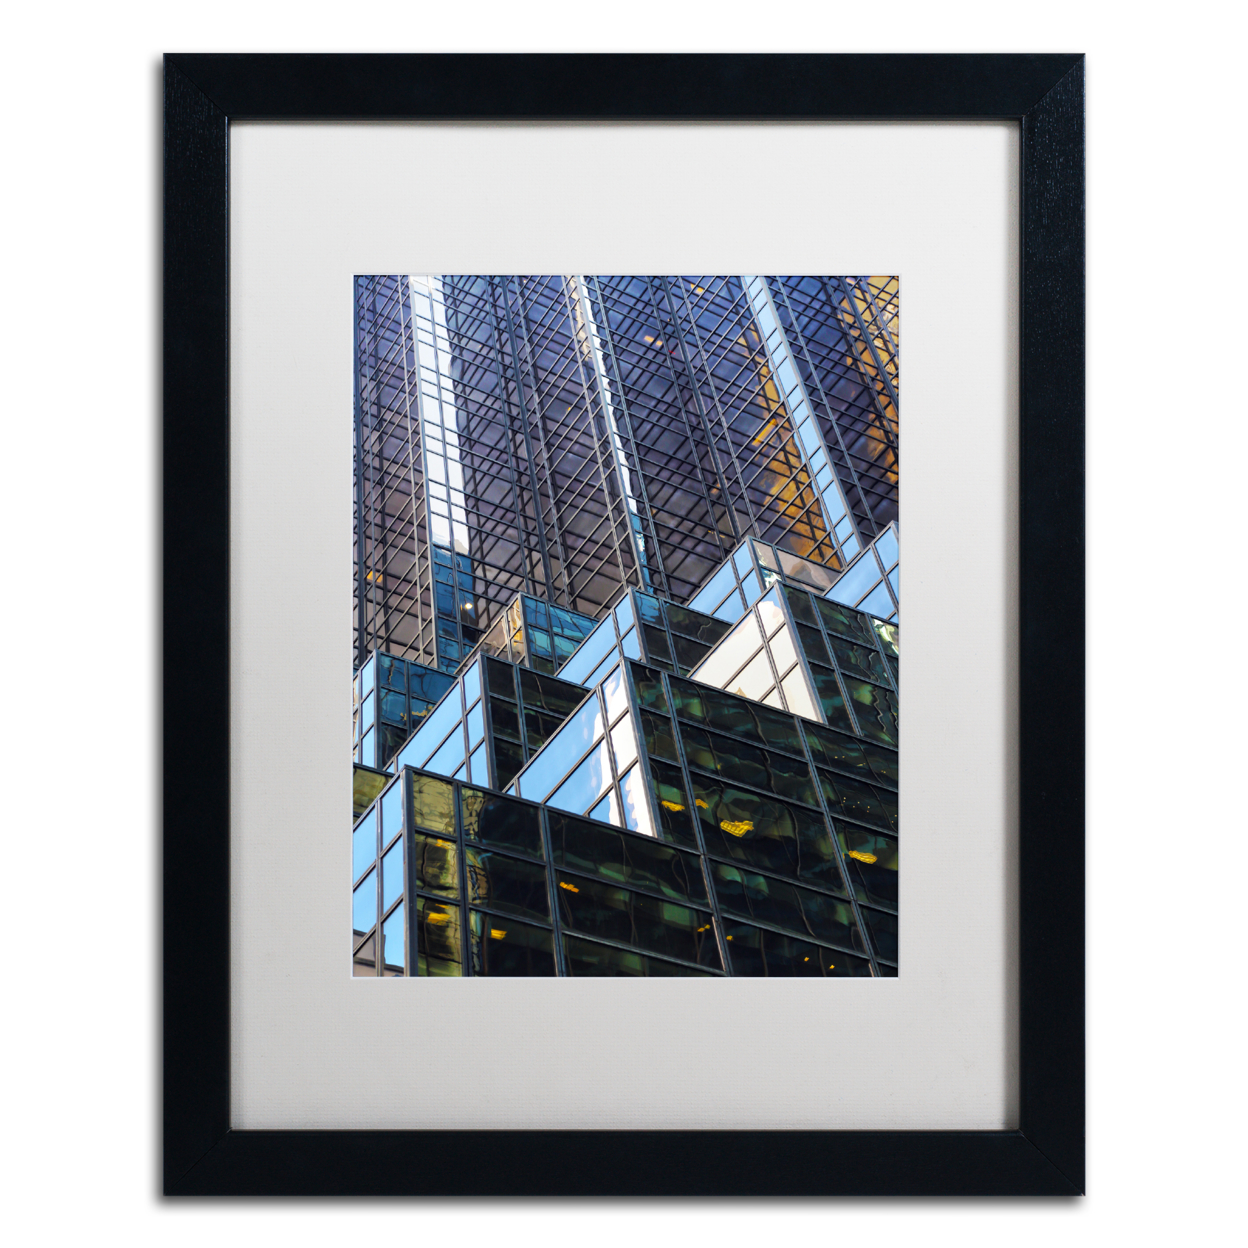 CATeyes 'Trump Tower' Black Wooden Framed Art 18 X 22 Inches